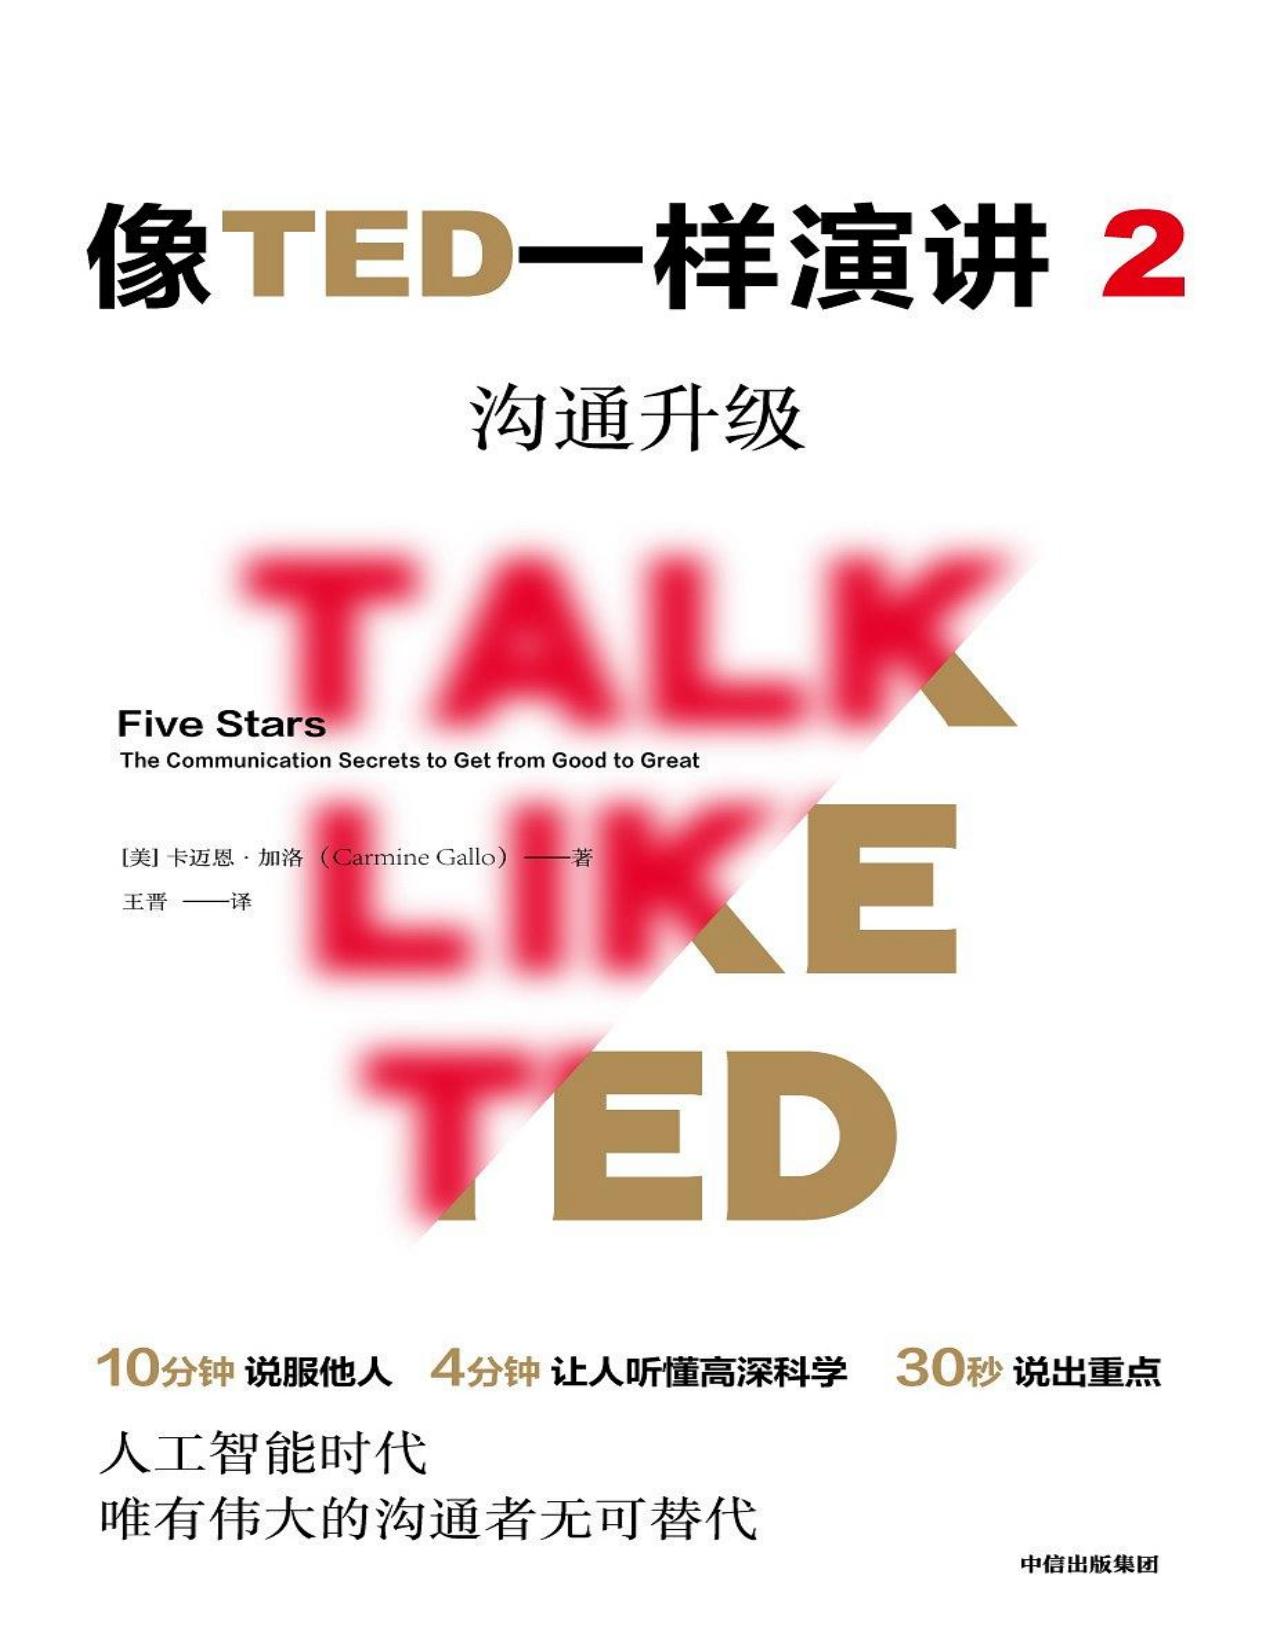 <div class=vernacular lang="zh">像TED一样演讲 = = Five stars the communication secrets to get from good to great / 2, 沟通升级.</div>
Xiang TED yi yang yan jiang = = Five stars the communication secrets to get from good to great. 2, Gou tong sheng ji